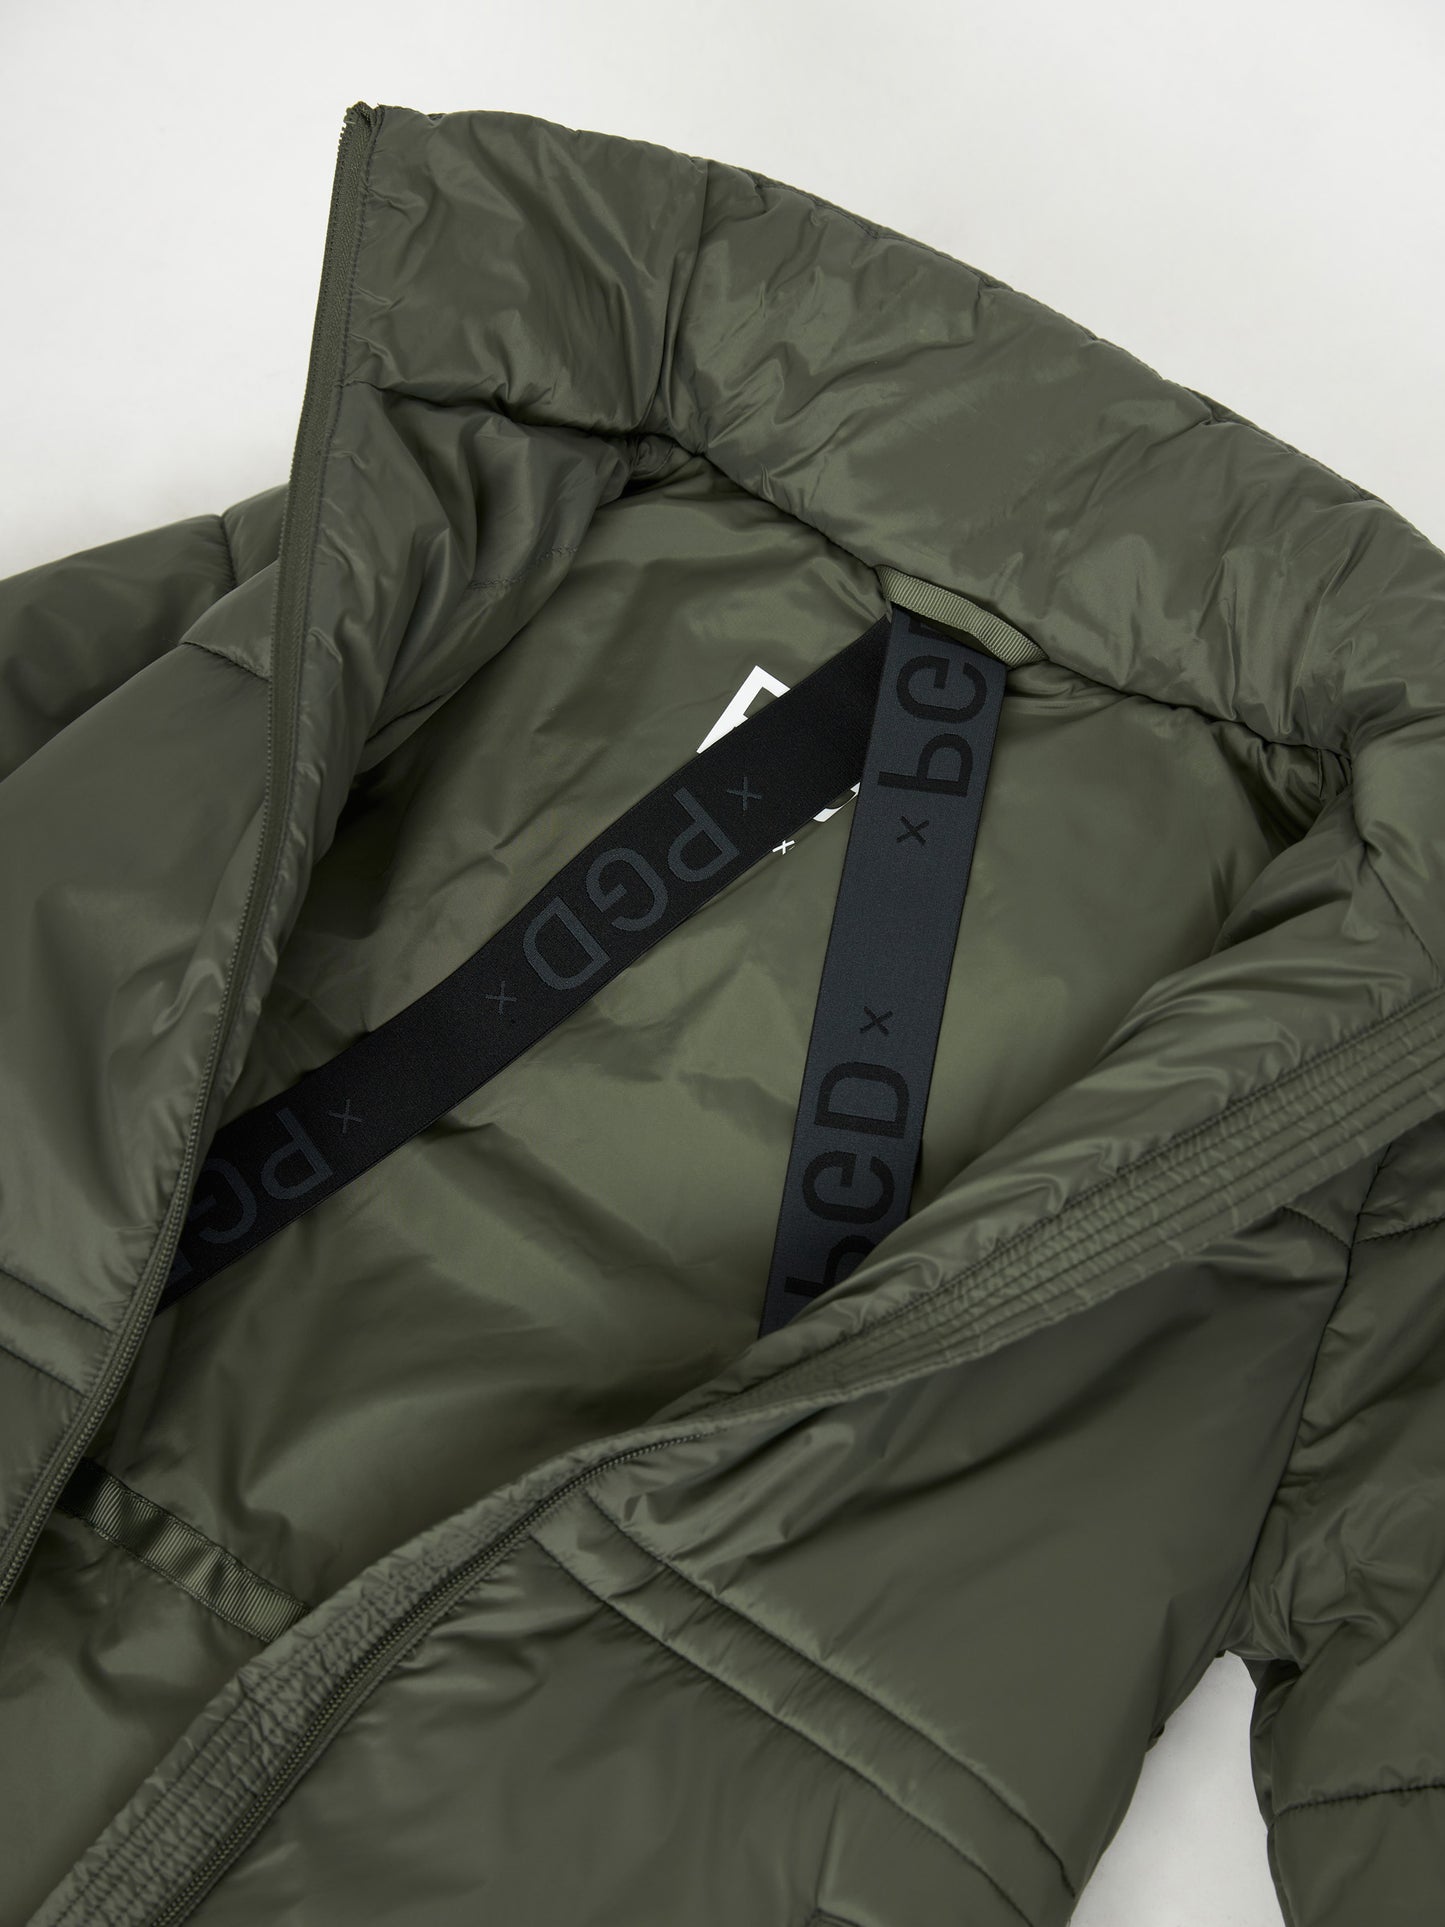 Lite Chill Everly Long Puffer Coat